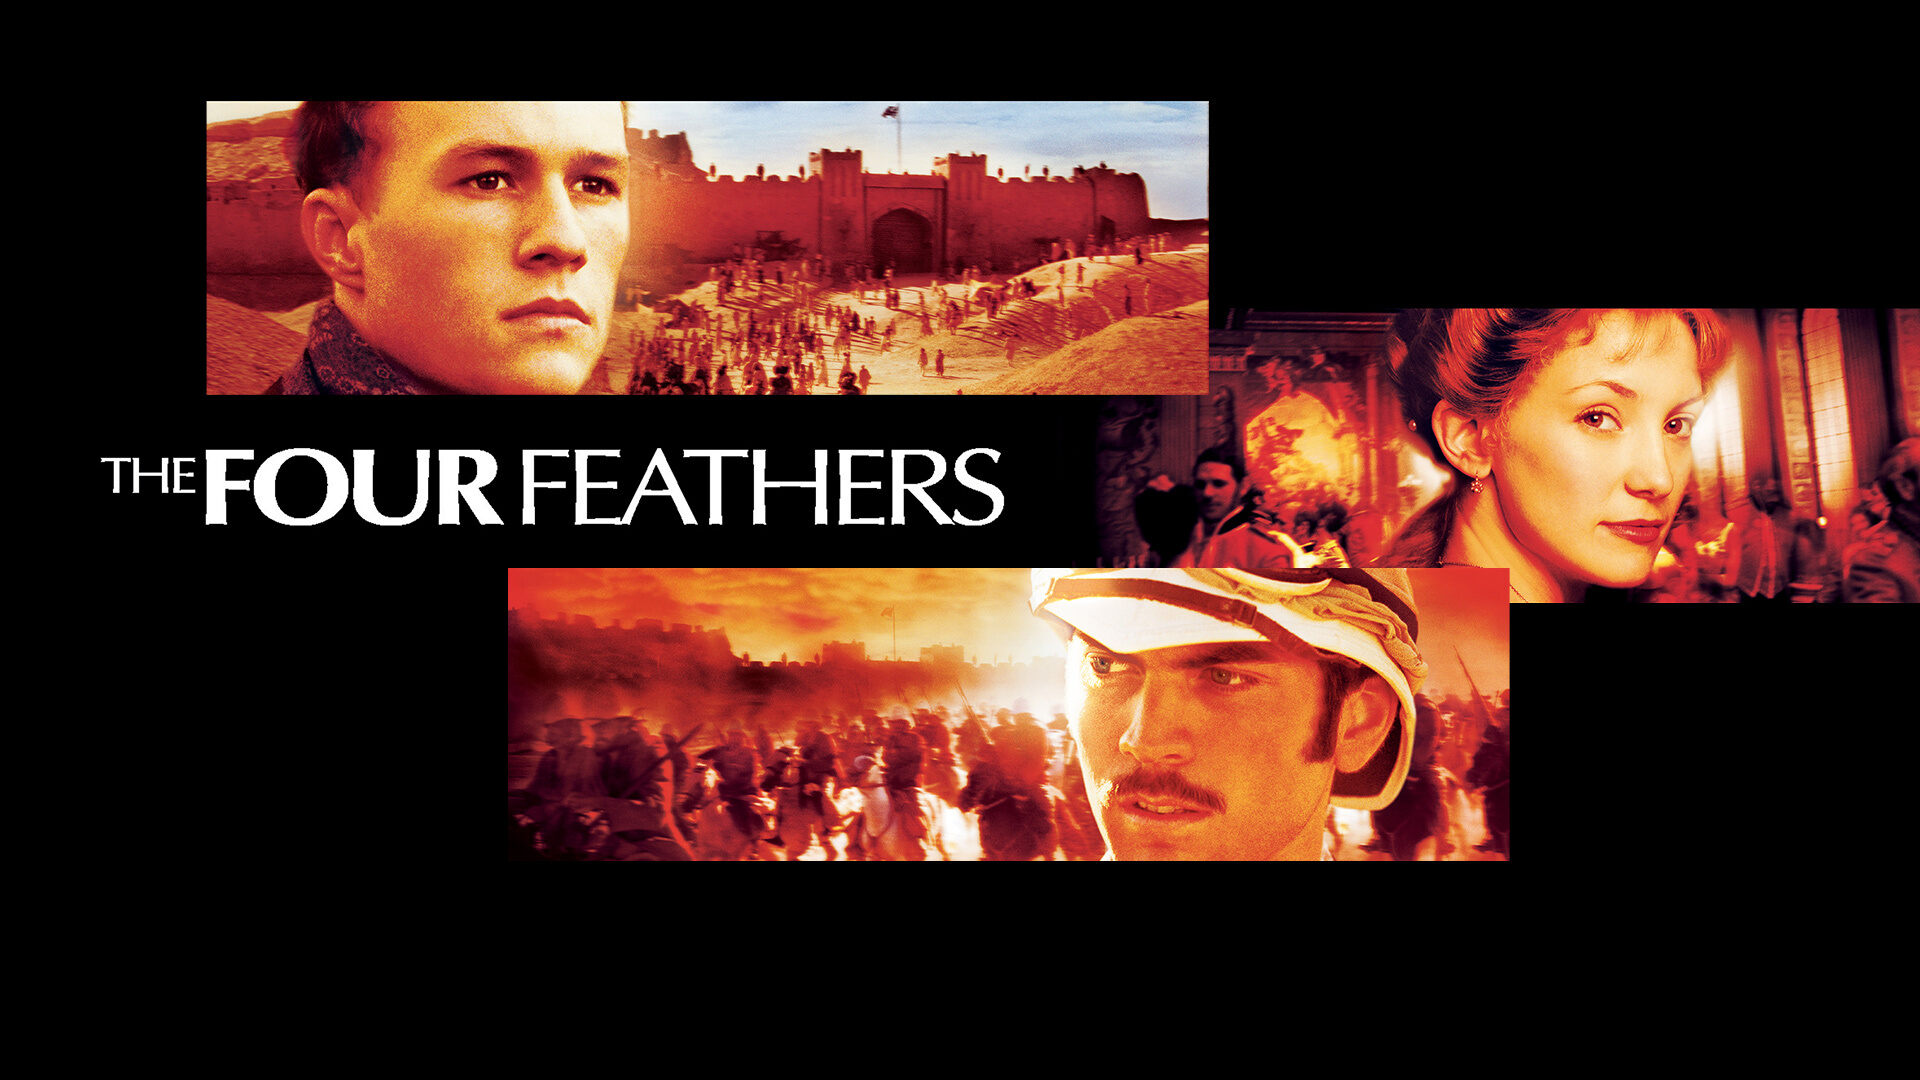 38-facts-about-the-movie-the-four-feathers